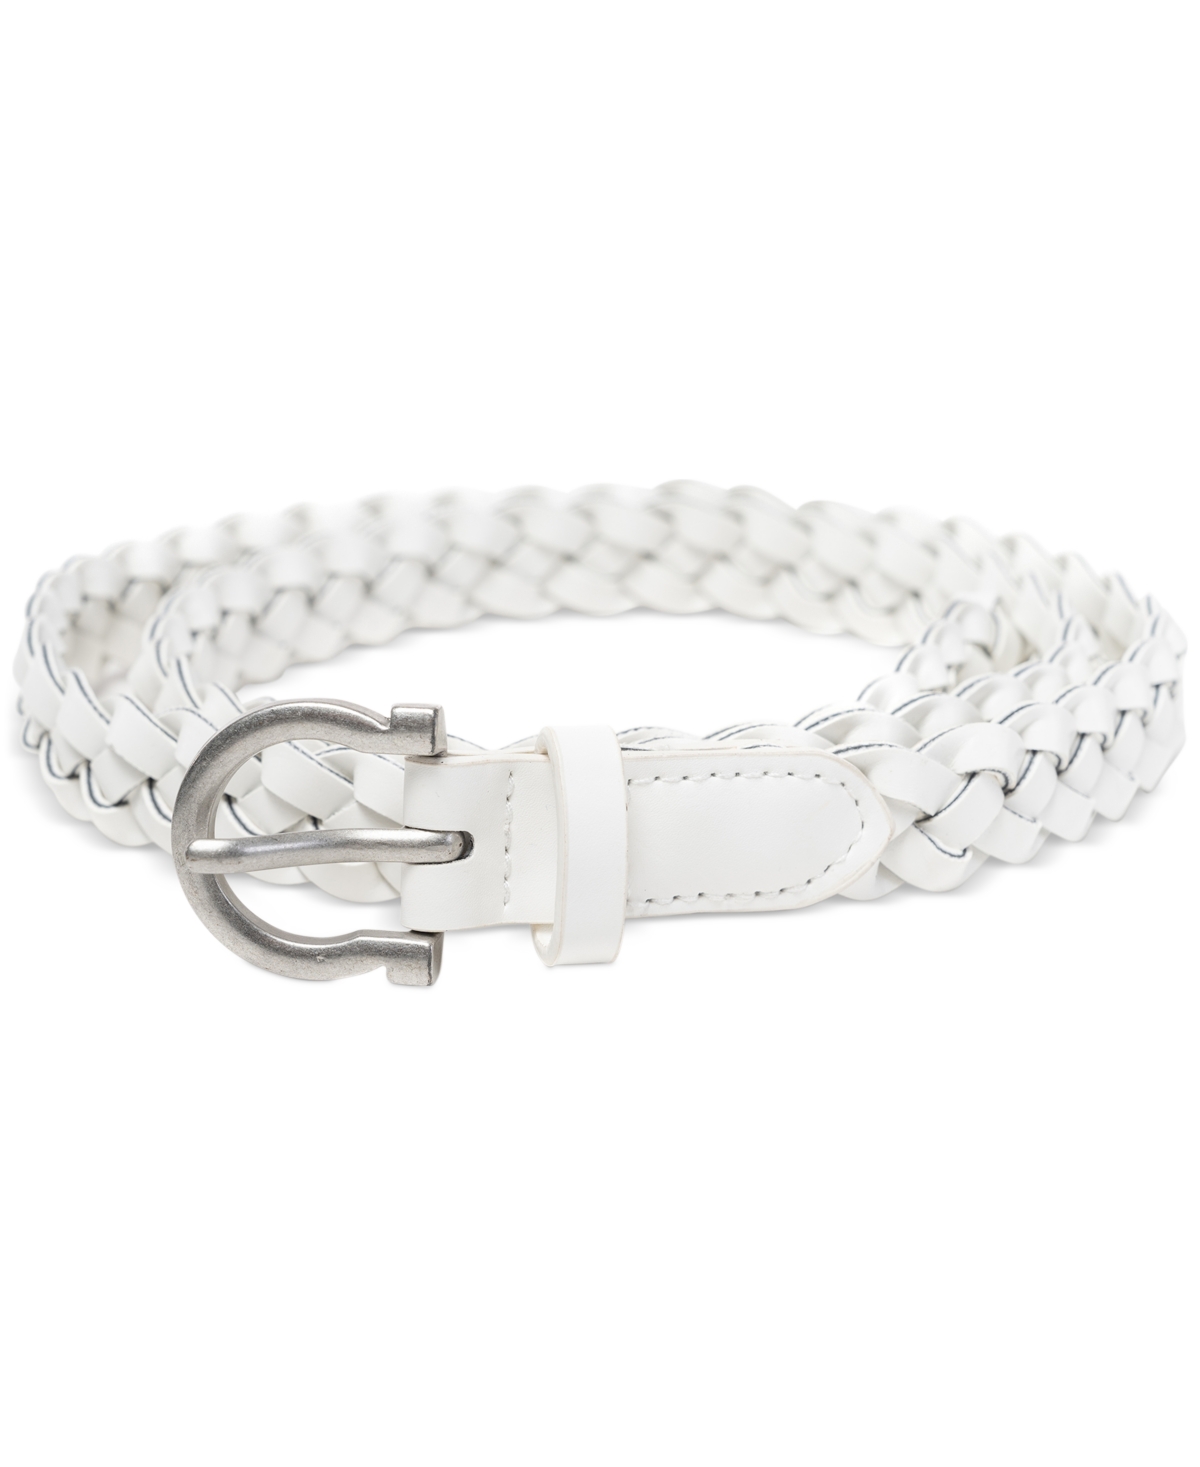 Women's Braided Faux-Leather Belt, Created for Macy's - Navy